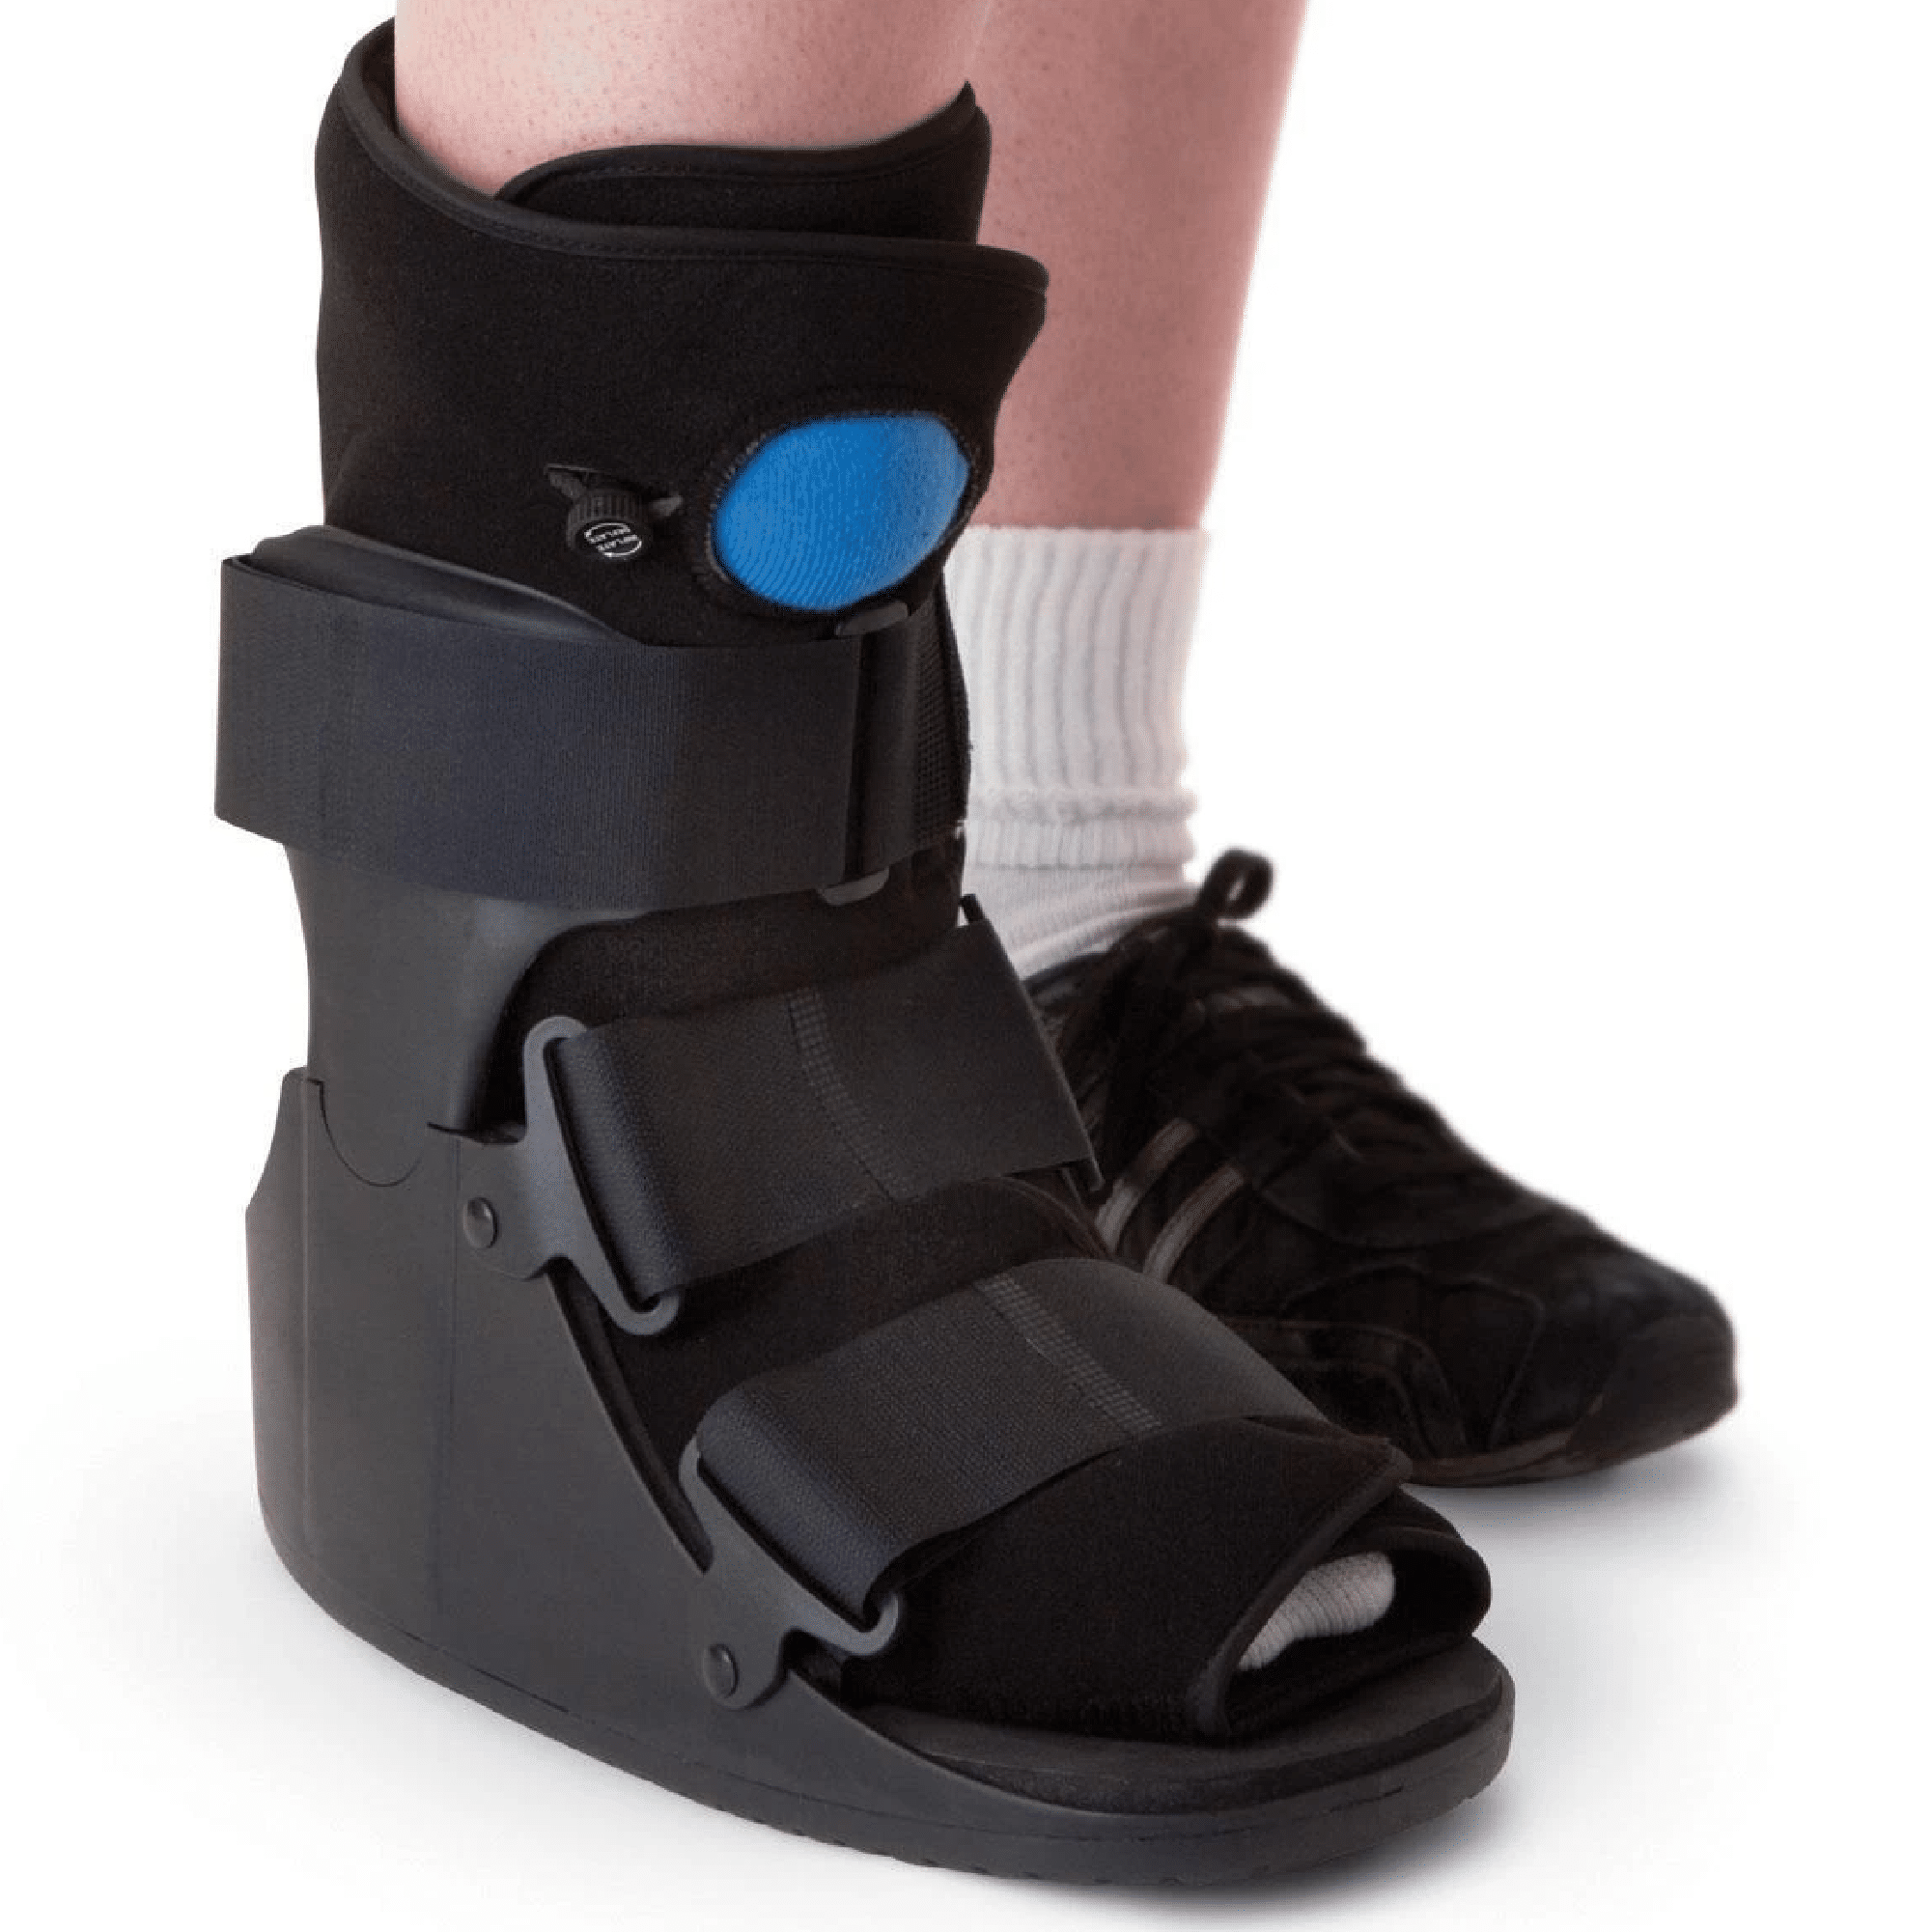 Foot Support - The Bone Store - Walking Boots & Post-Op shoes